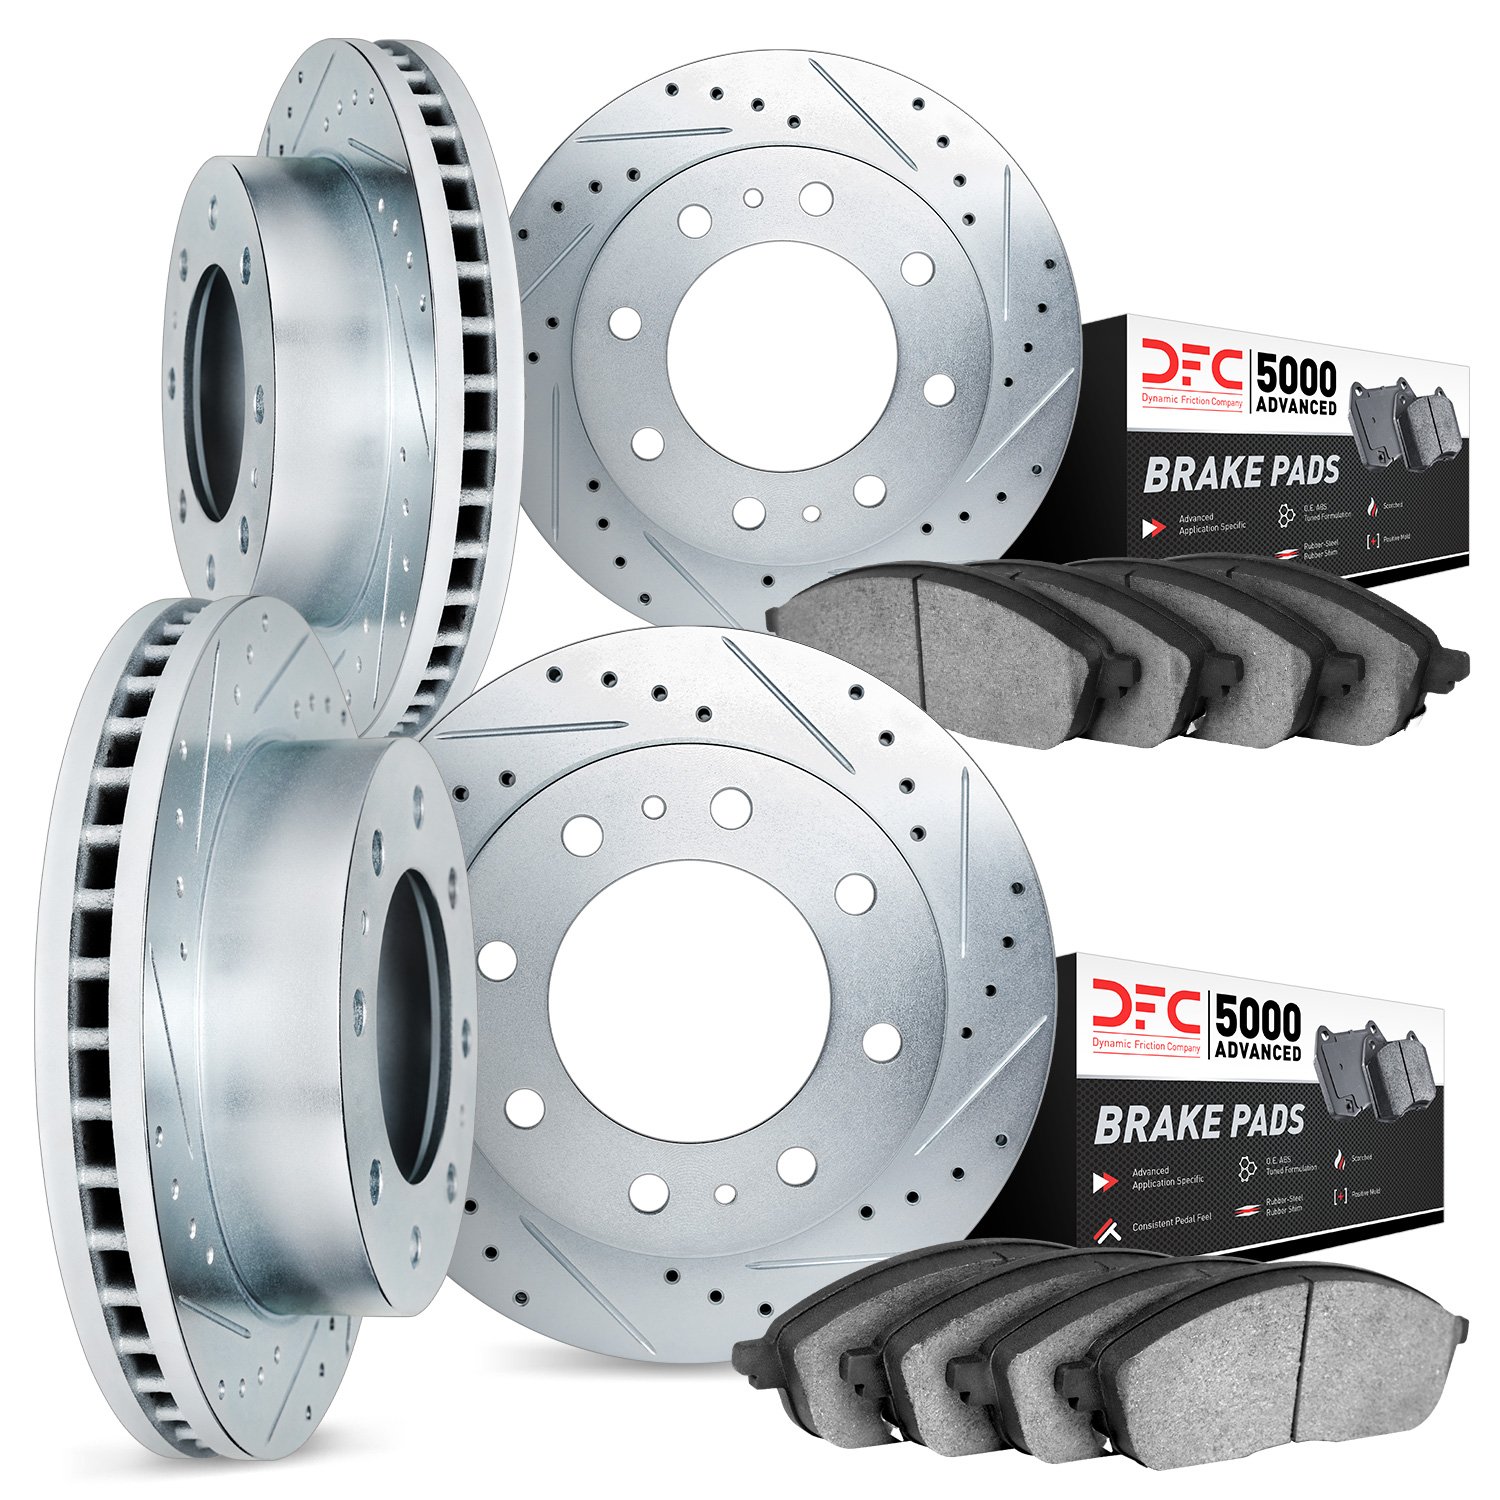 7504-54335 Drilled/Slotted Brake Rotors w/5000 Advanced Brake Pads Kit [Silver], 2003-2004 Ford/Lincoln/Mercury/Mazda, Position: